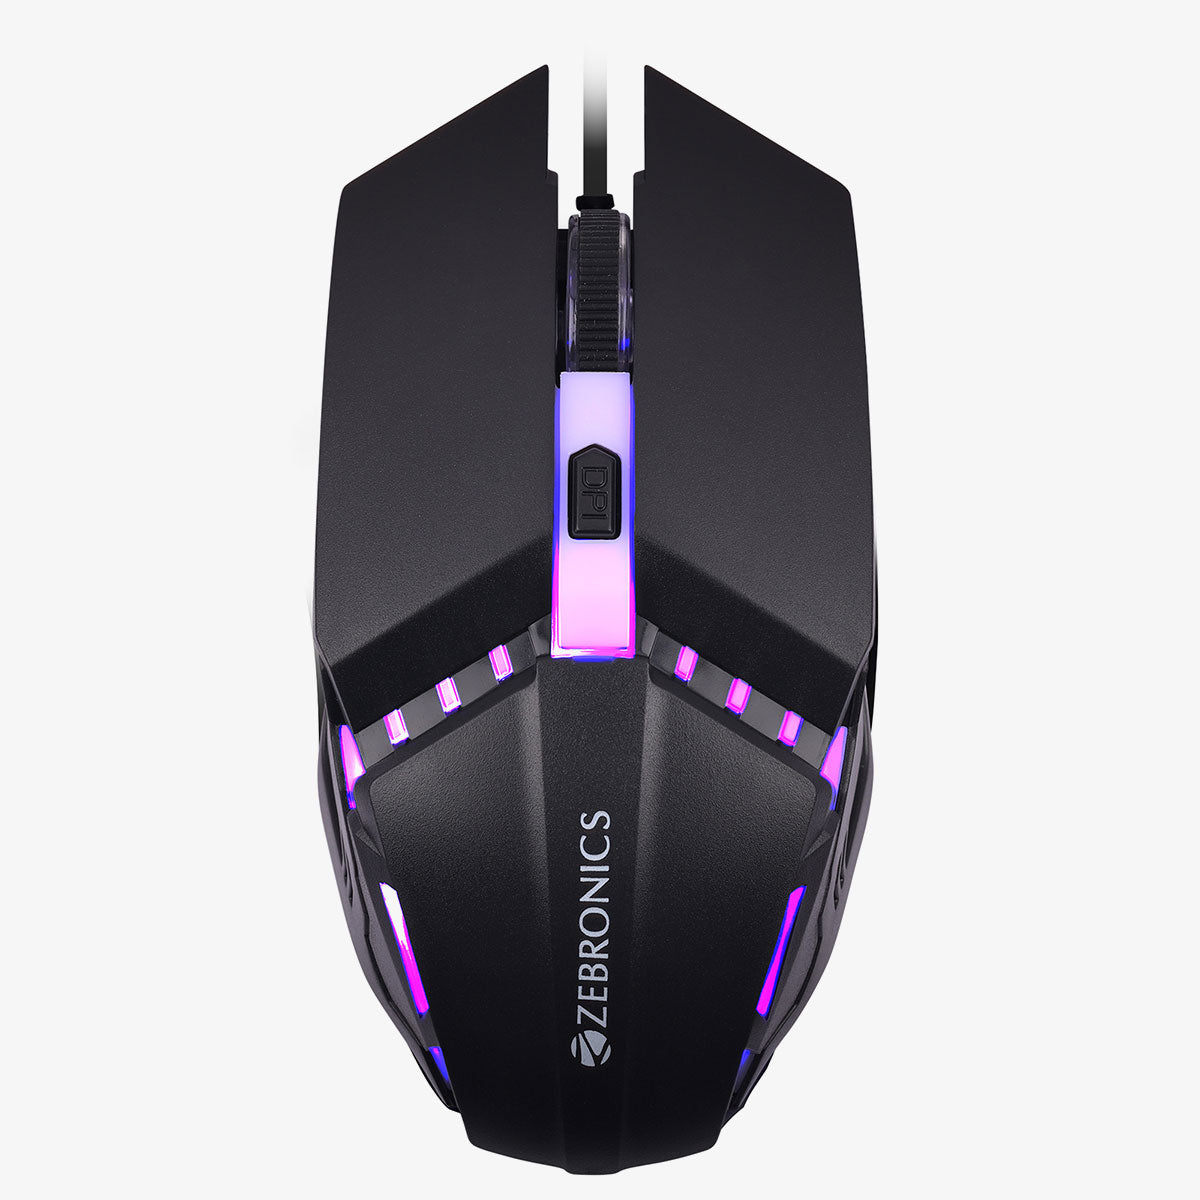 Phero Wired Mouse